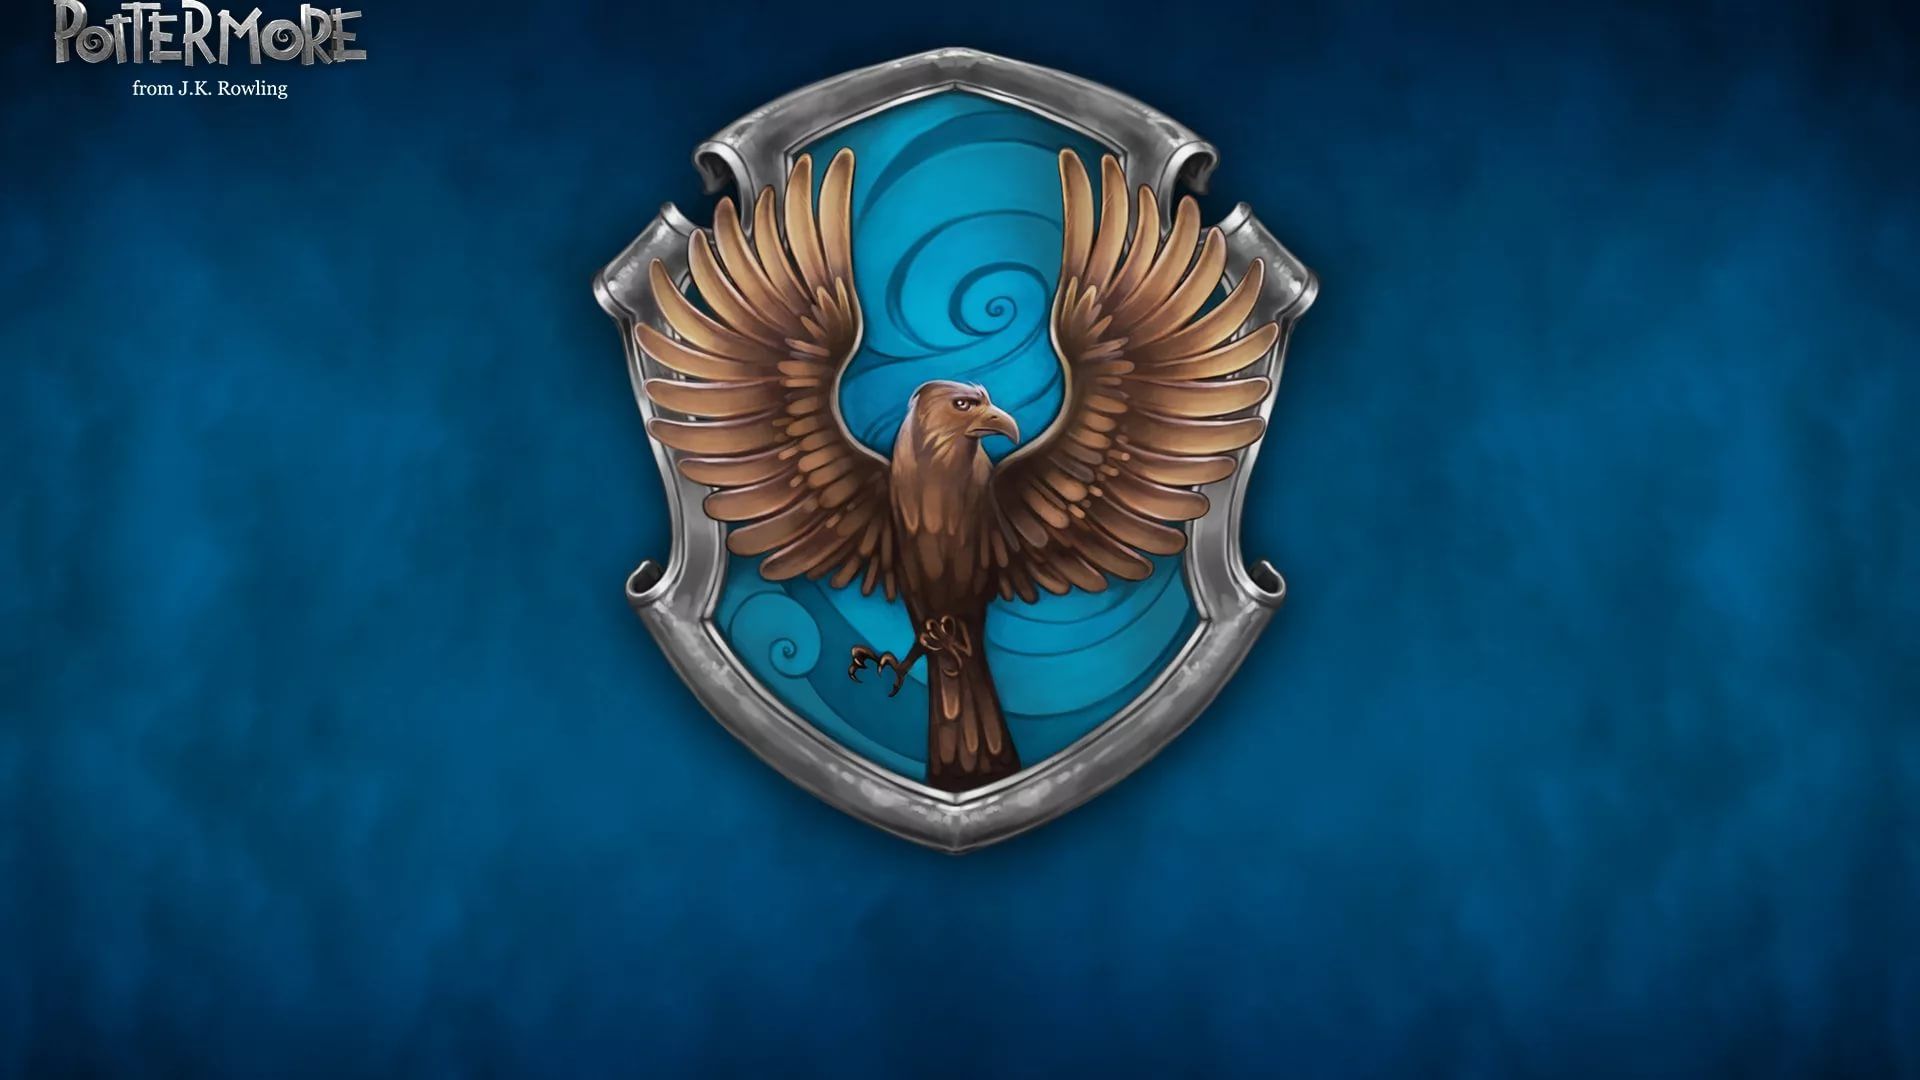 Ravenclaw Full Hd Wallpaper - Ravenclaw Blue And Bronze Eagle - HD Wallpaper 